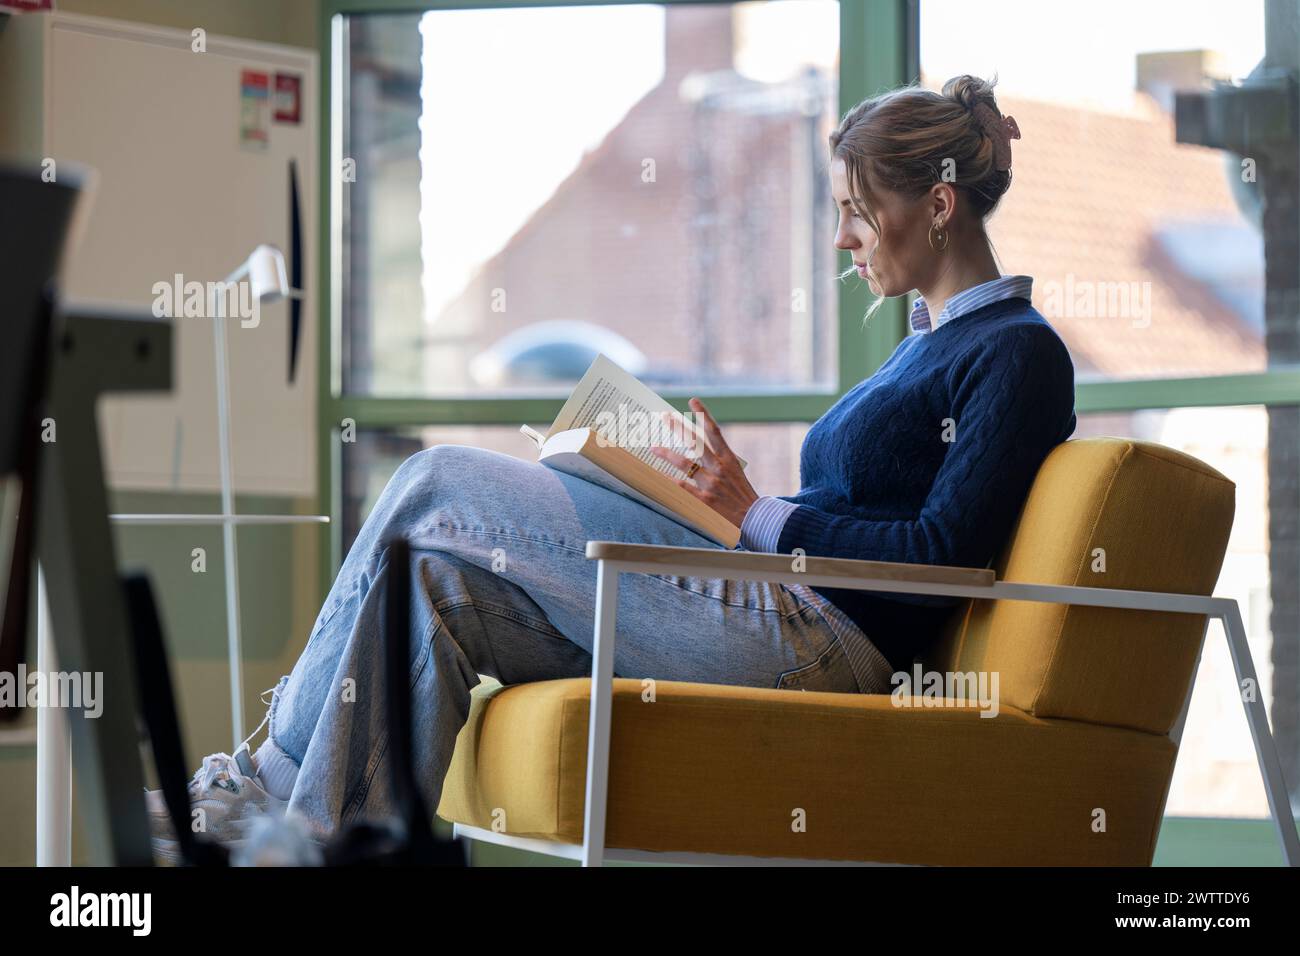 Engrossed in literature by the window Stock Photo